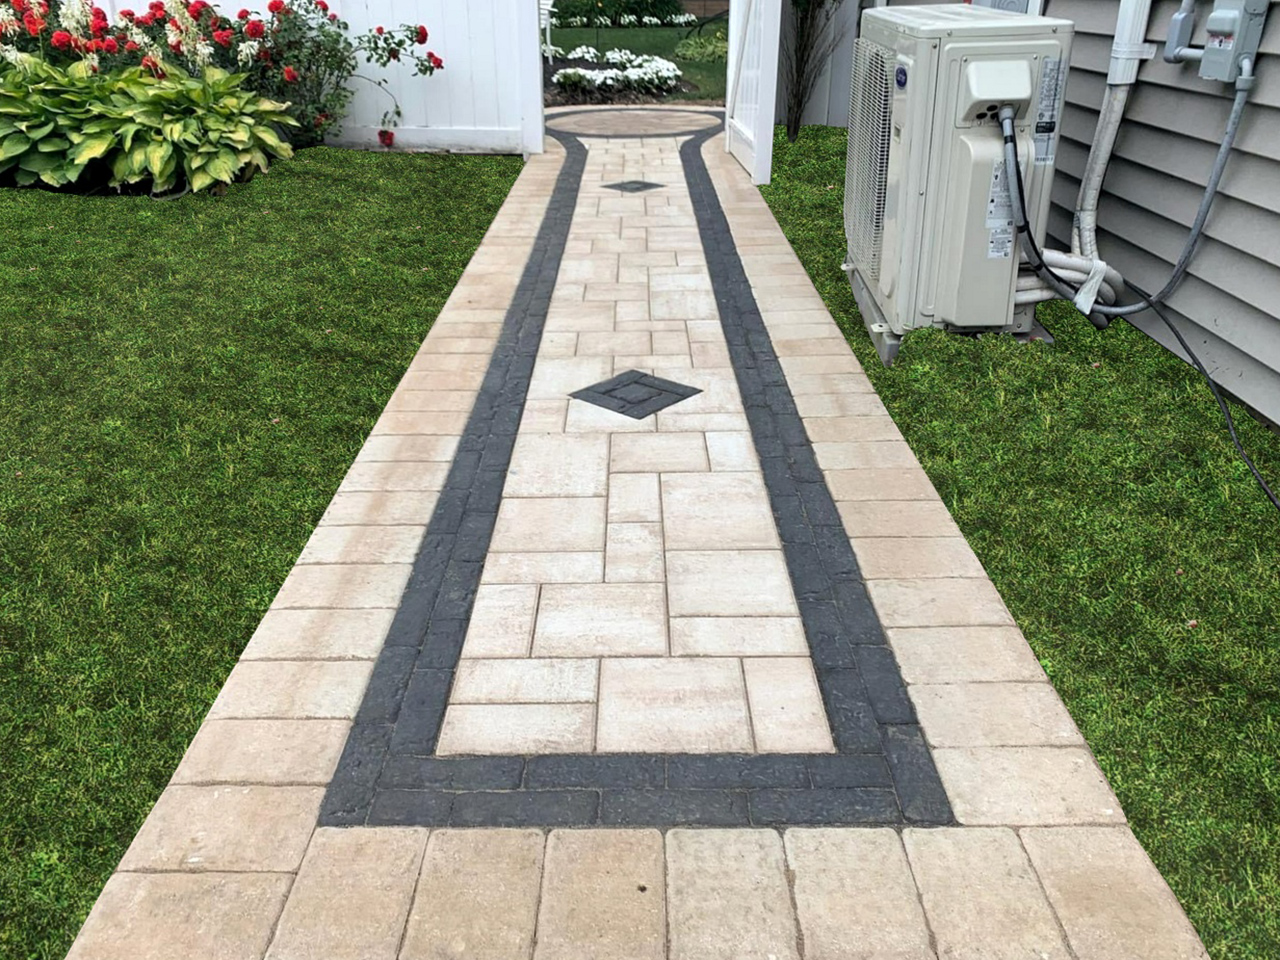 paver walkway installation. An elegantly designed walkway in a patio, showcasing Affordable Patio's attention to detail and craftsmanship